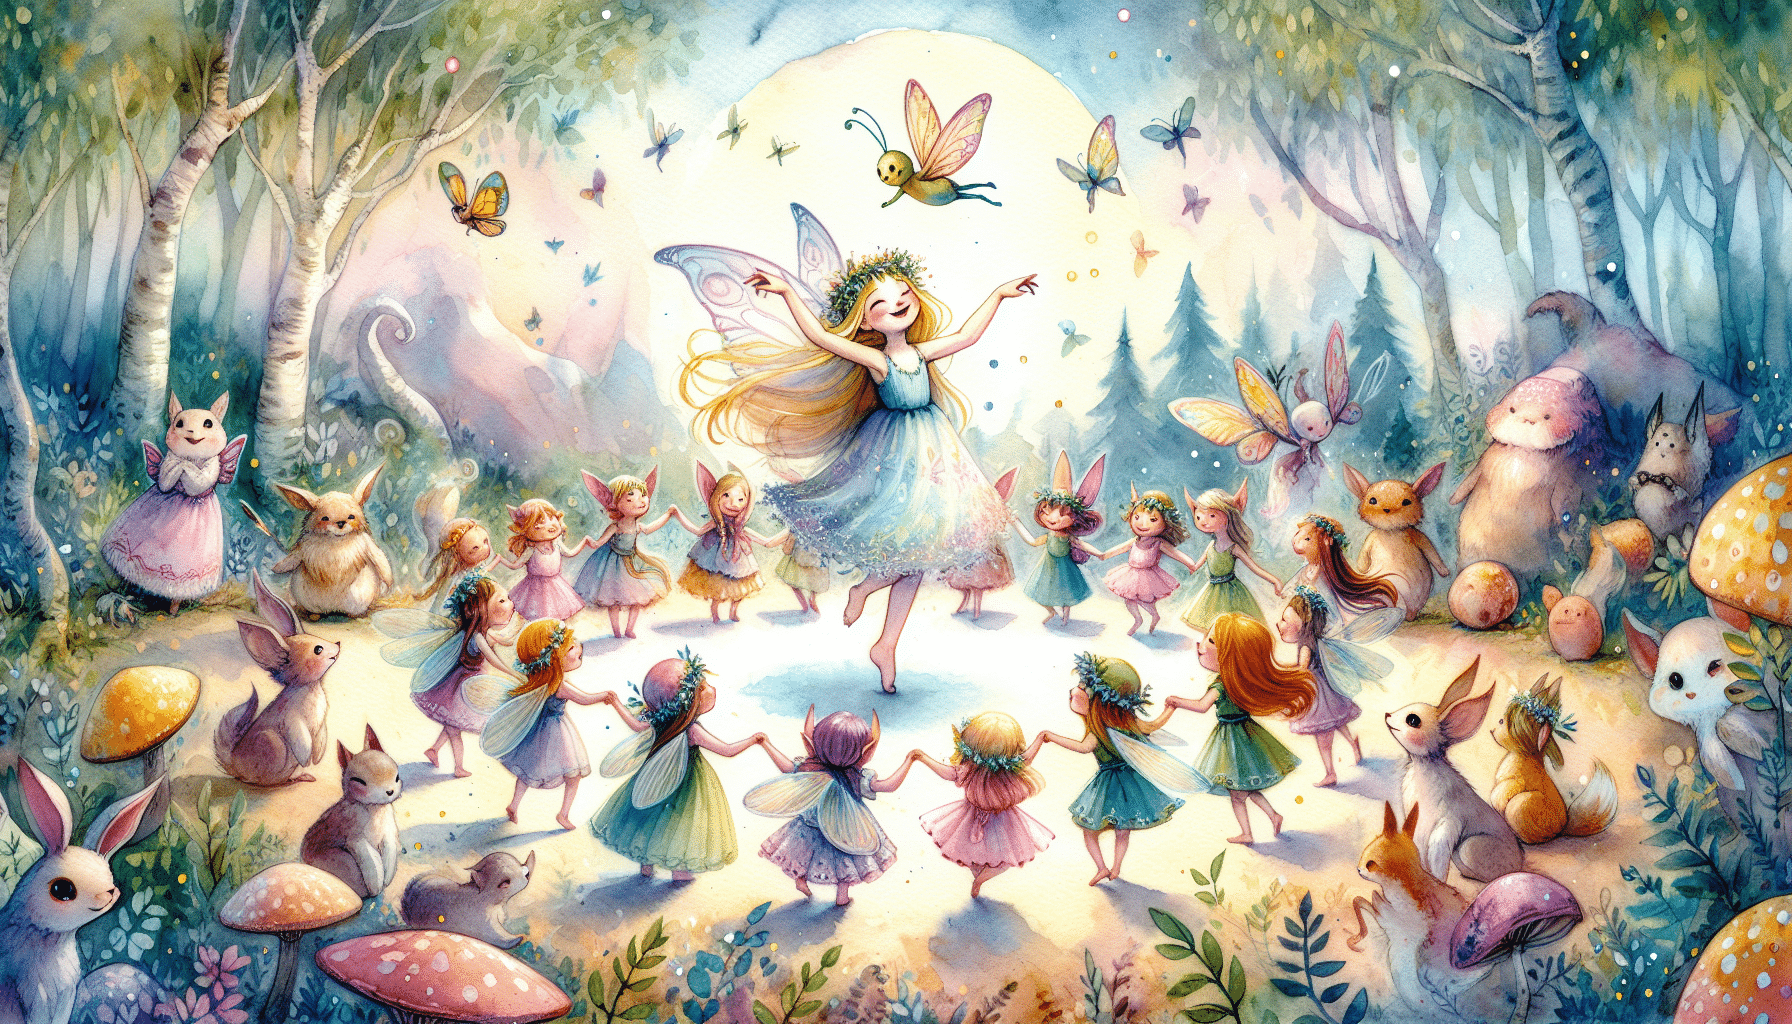 The Fairy Ring Dancing with the Fae Folk